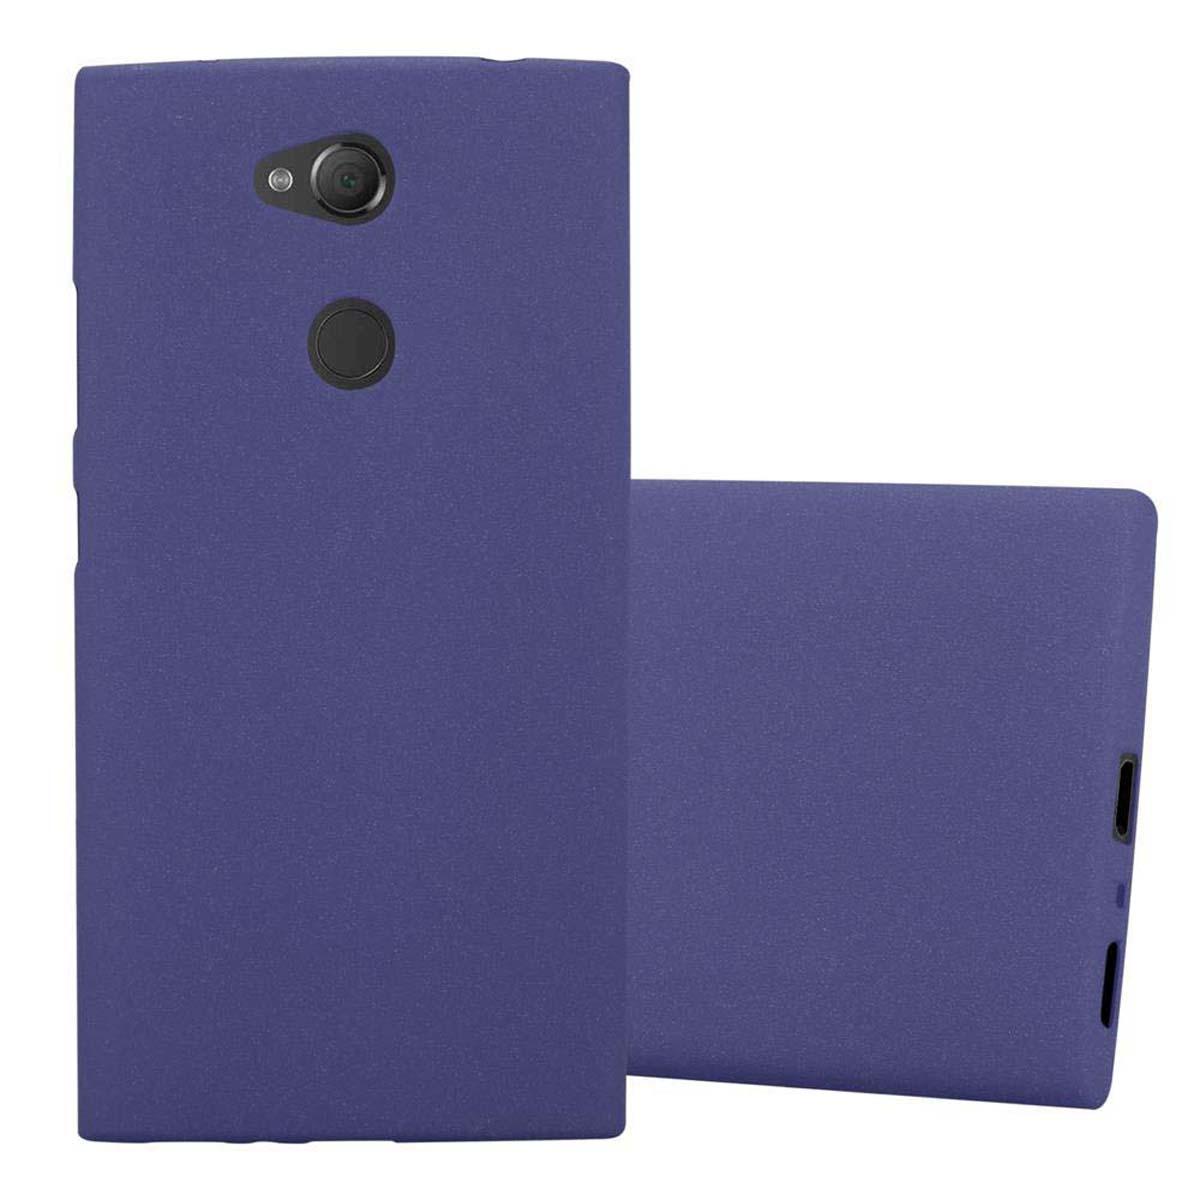 Backcover, DUNKEL TPU Sony, FROST L2, BLAU Schutzhülle, Xperia Frosted CADORABO